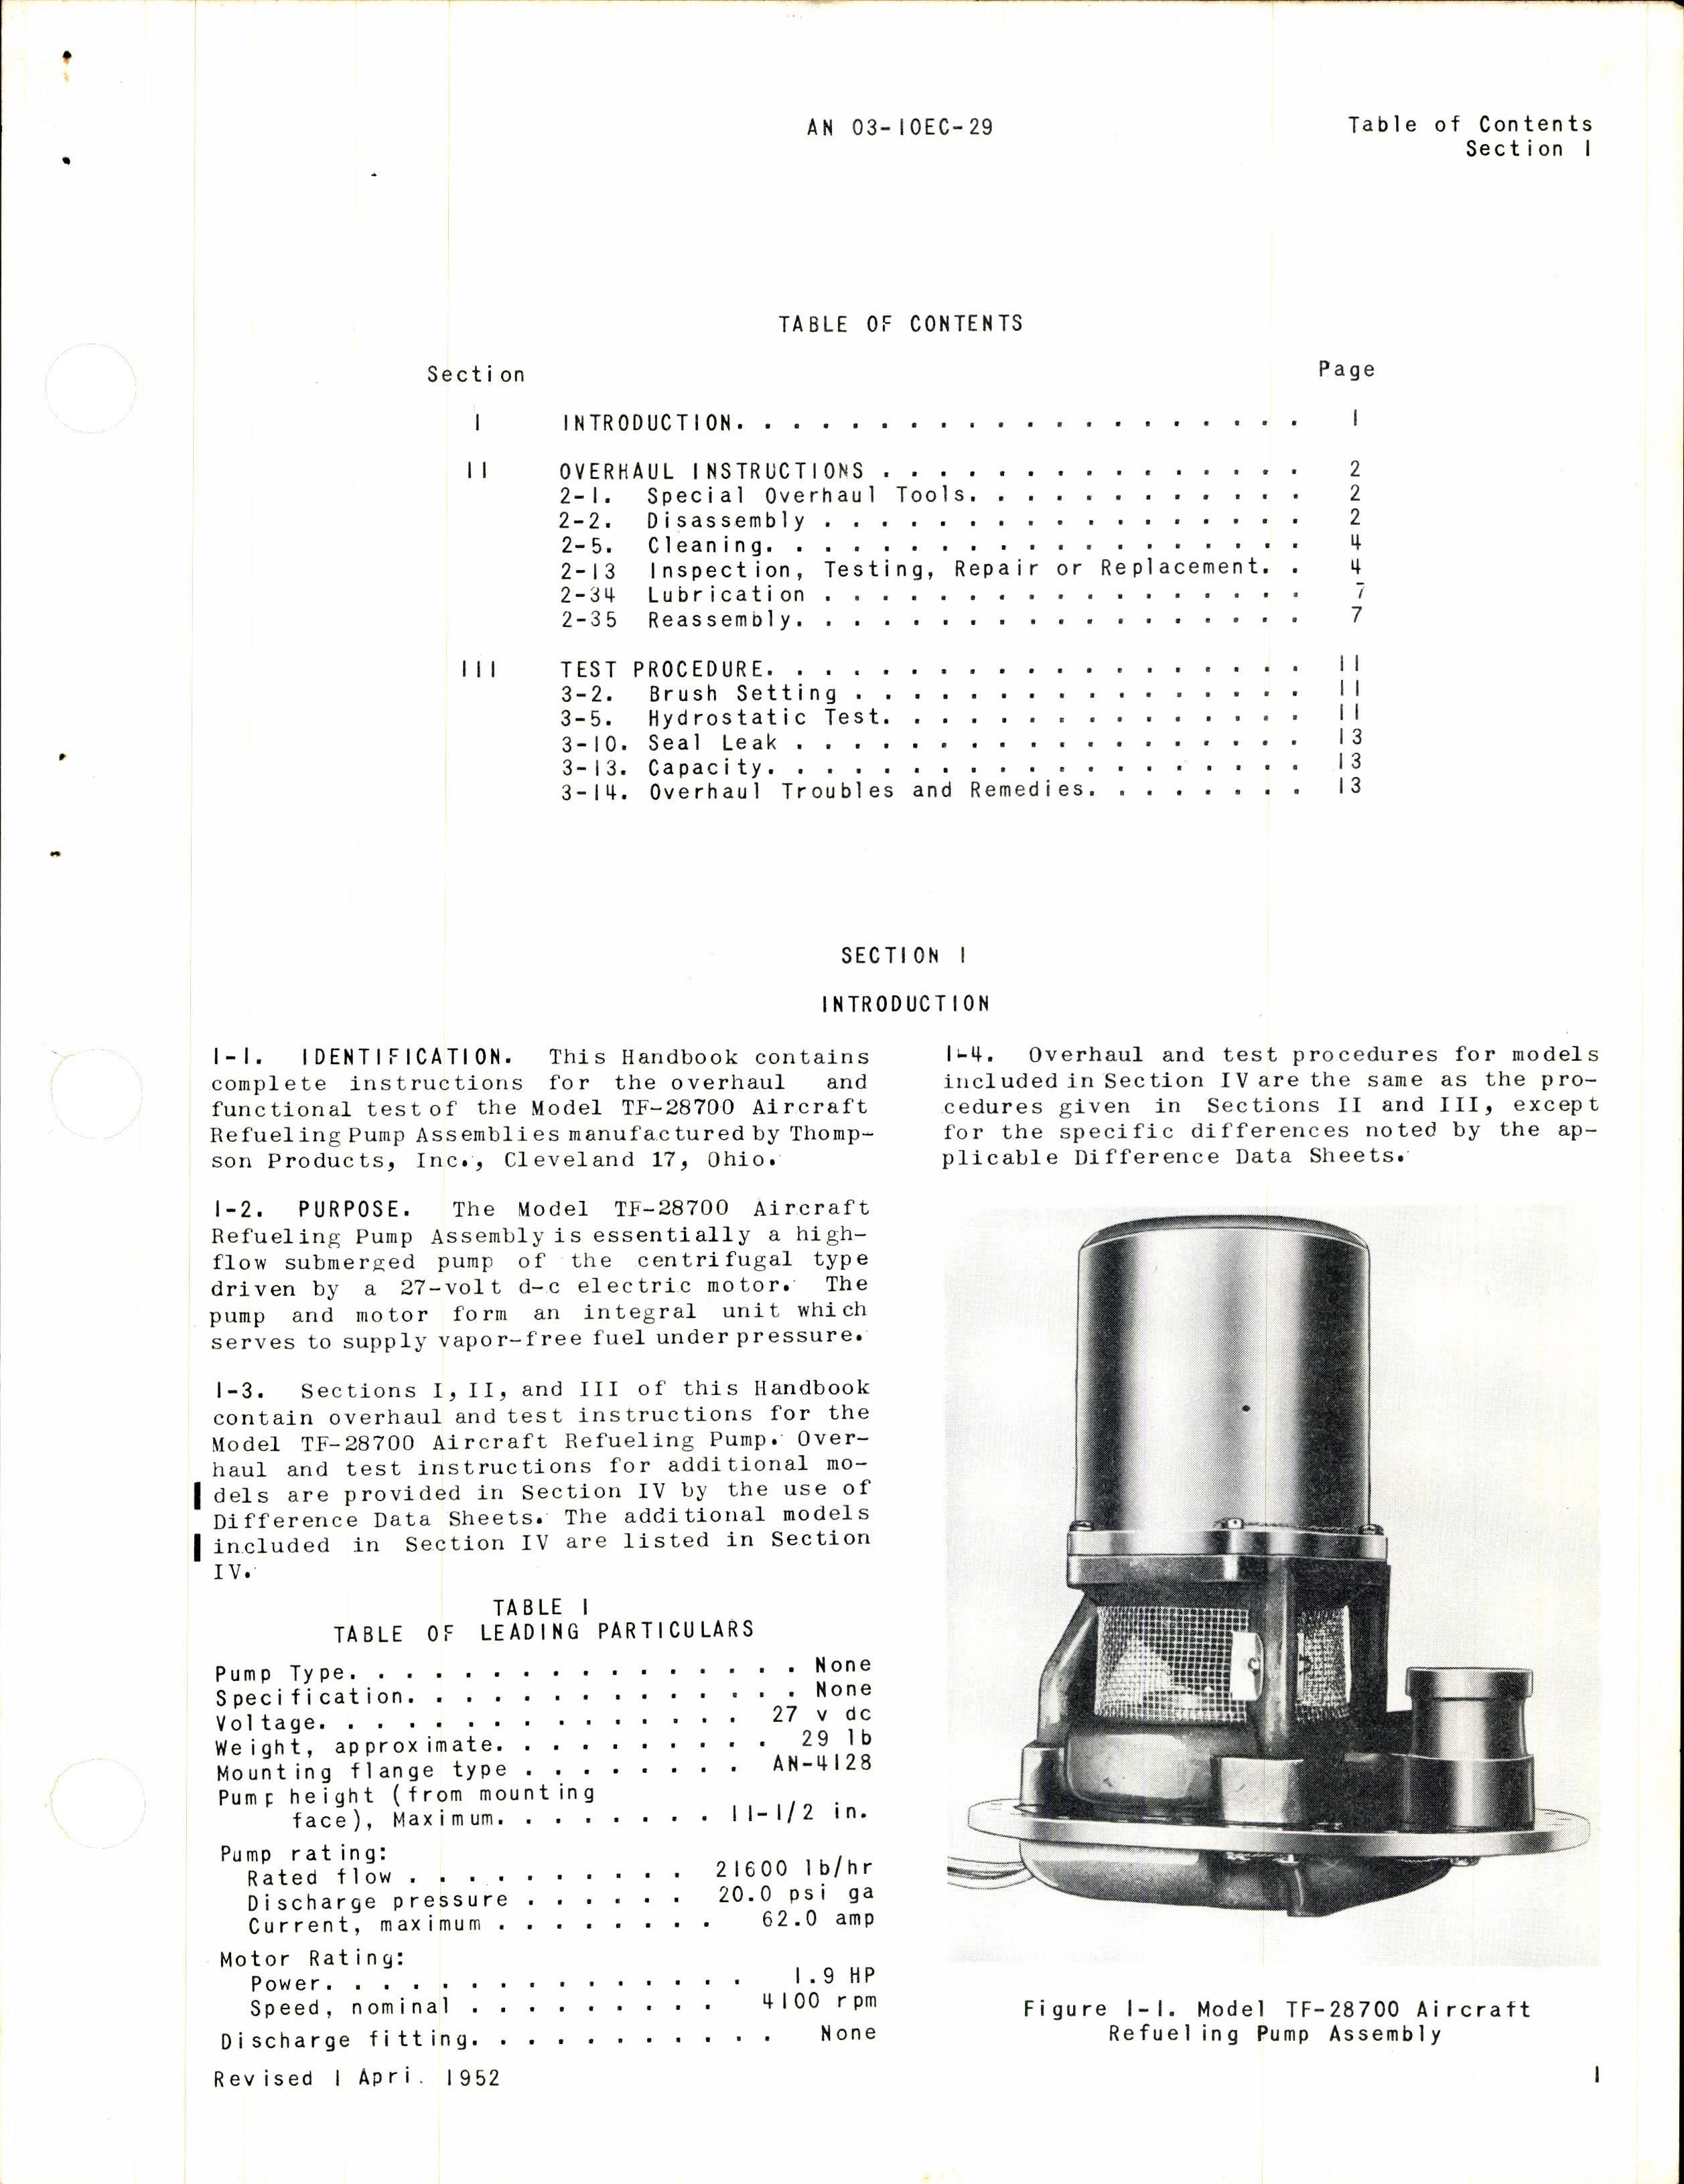 Sample page 3 from AirCorps Library document: Overhaul Instructions for Thompson Refueling and Booster Pumps